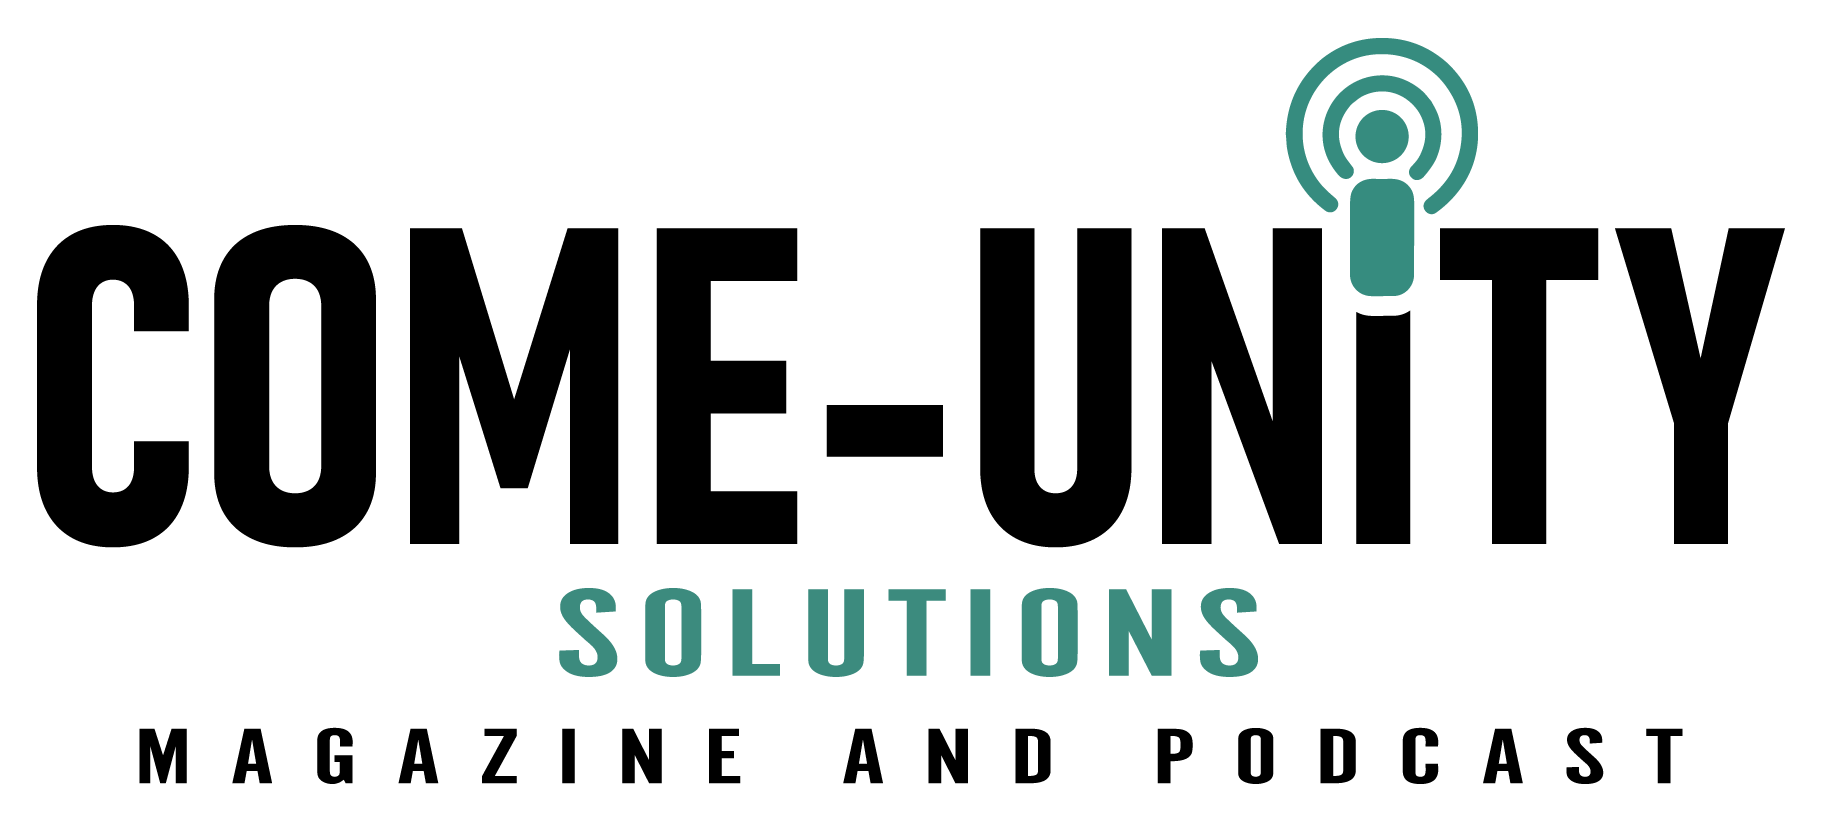 COME-UNITY Solutions 